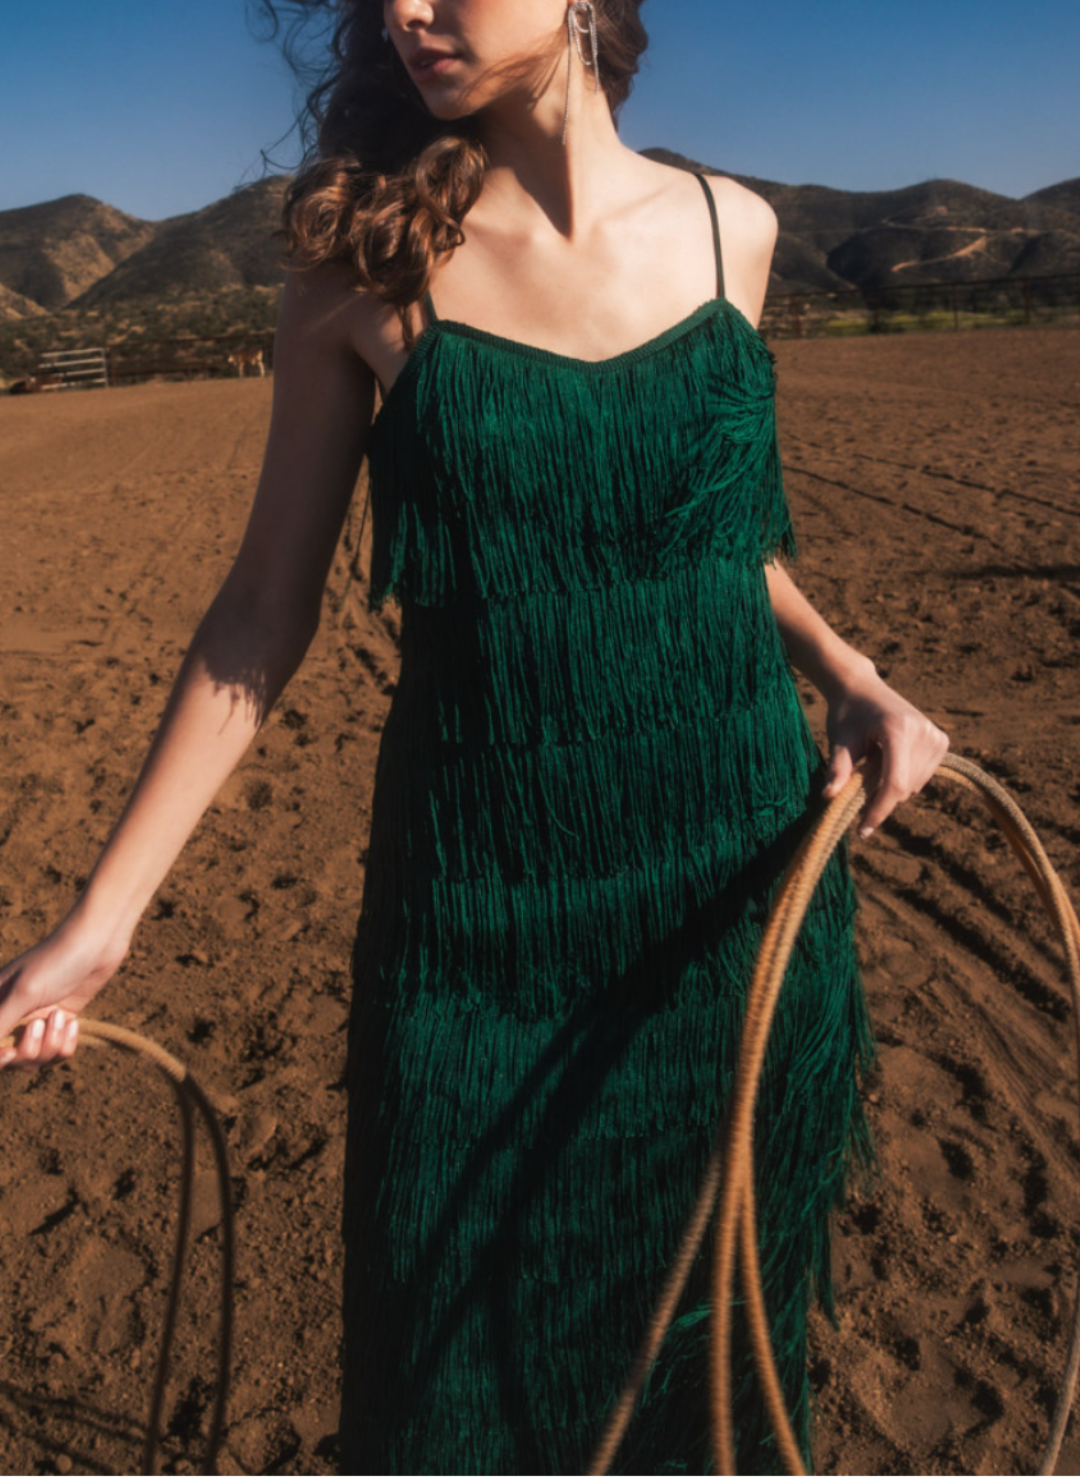 Up close view of model holding lasso and wearing Gi Fringe Strap Dress with vibrant green color and fun fringe.